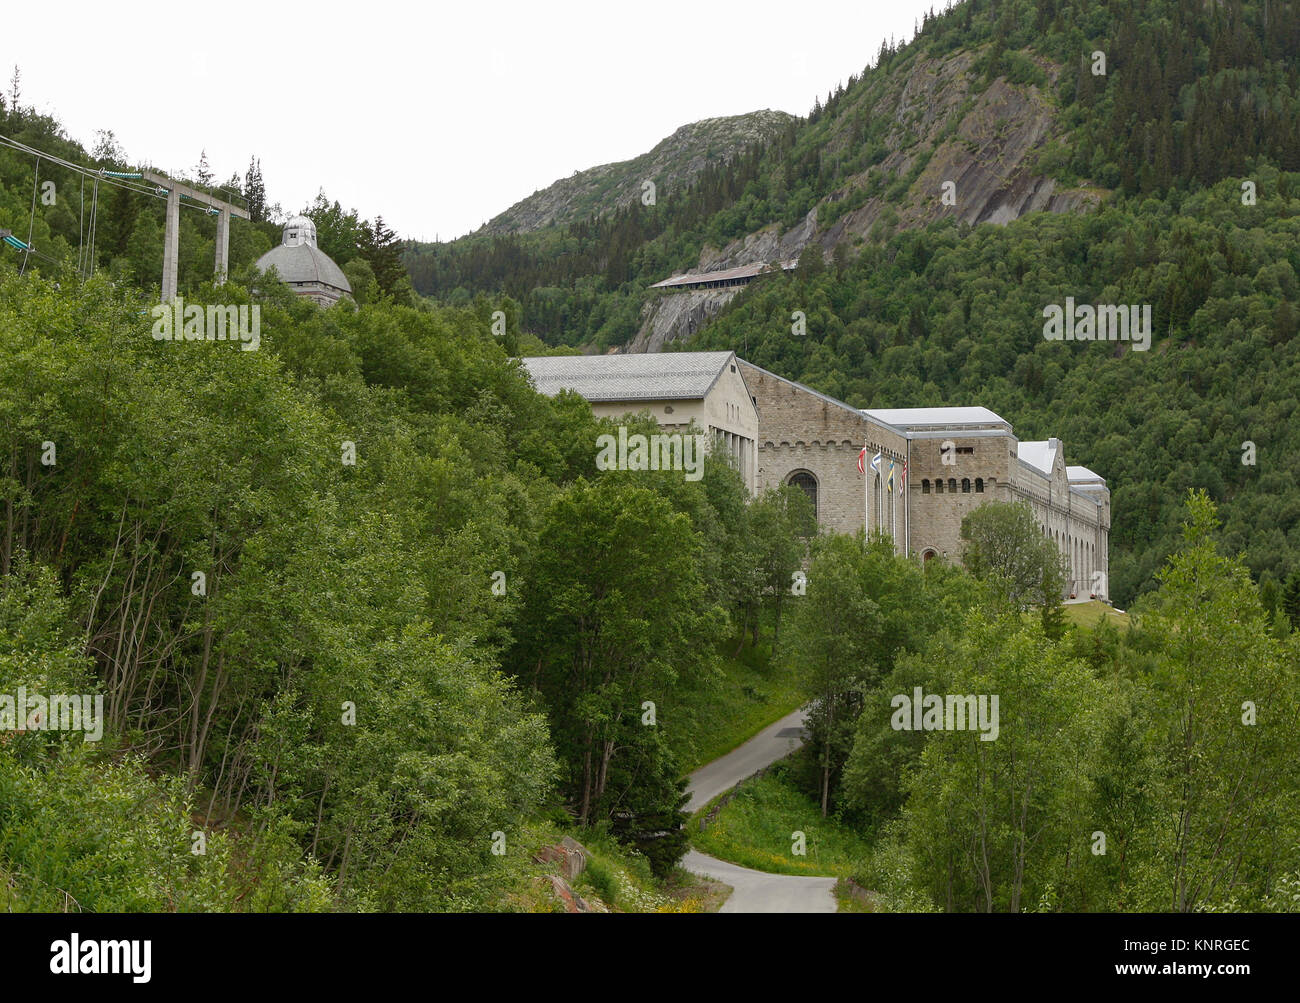 The Vemork Hydroelectric Power Plant in Rjukan, Norway seen from above. First plant to mass-produce heavy water. Museum today. Stock Photo